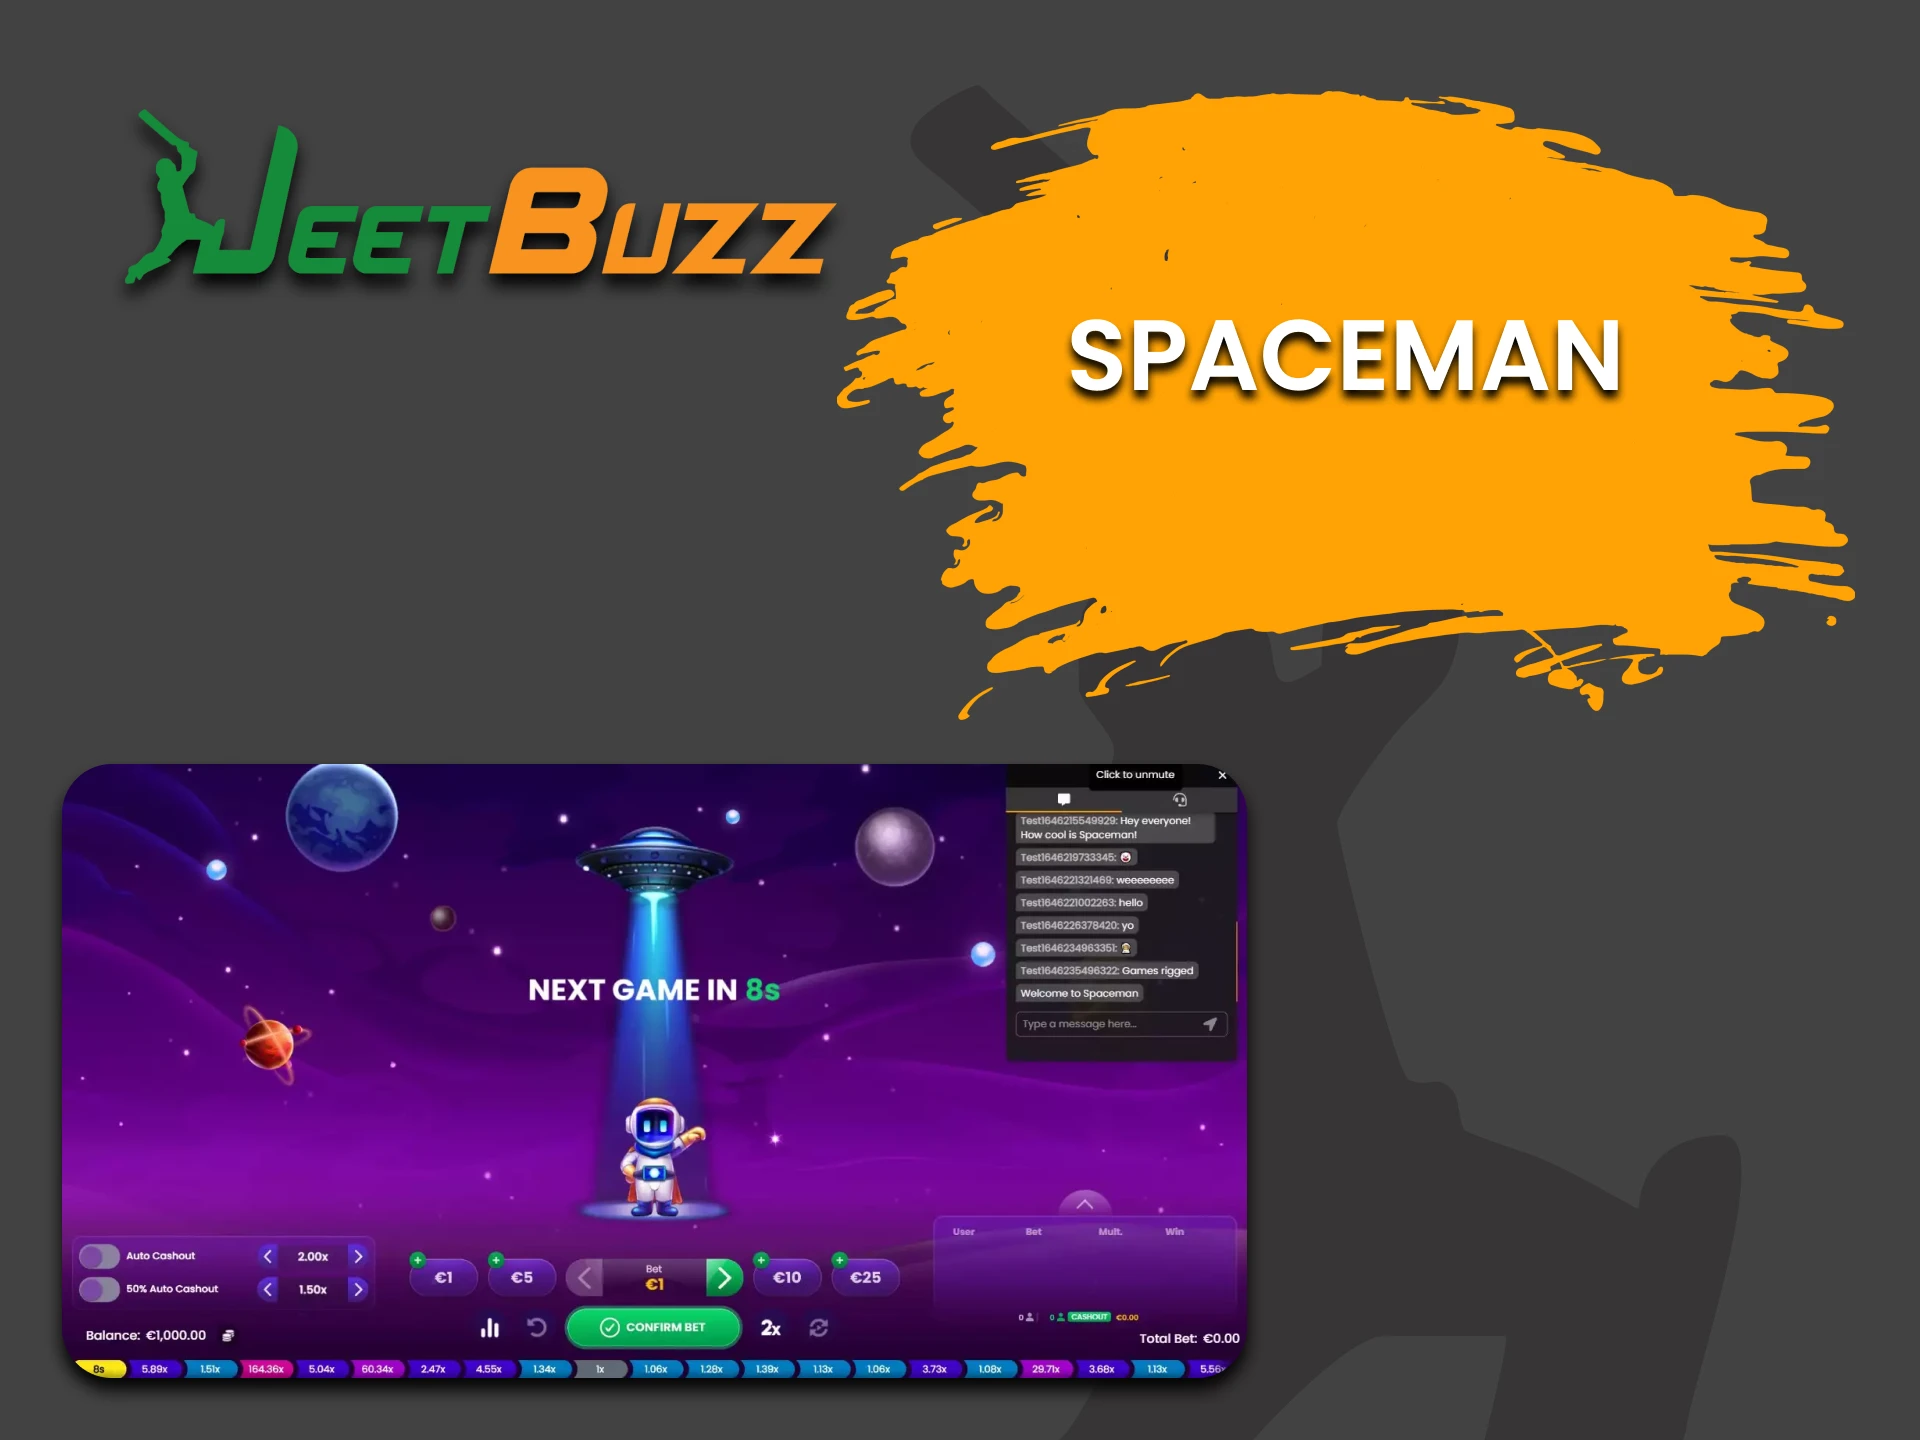 For games on JeetBuzz, choose Spaceman.